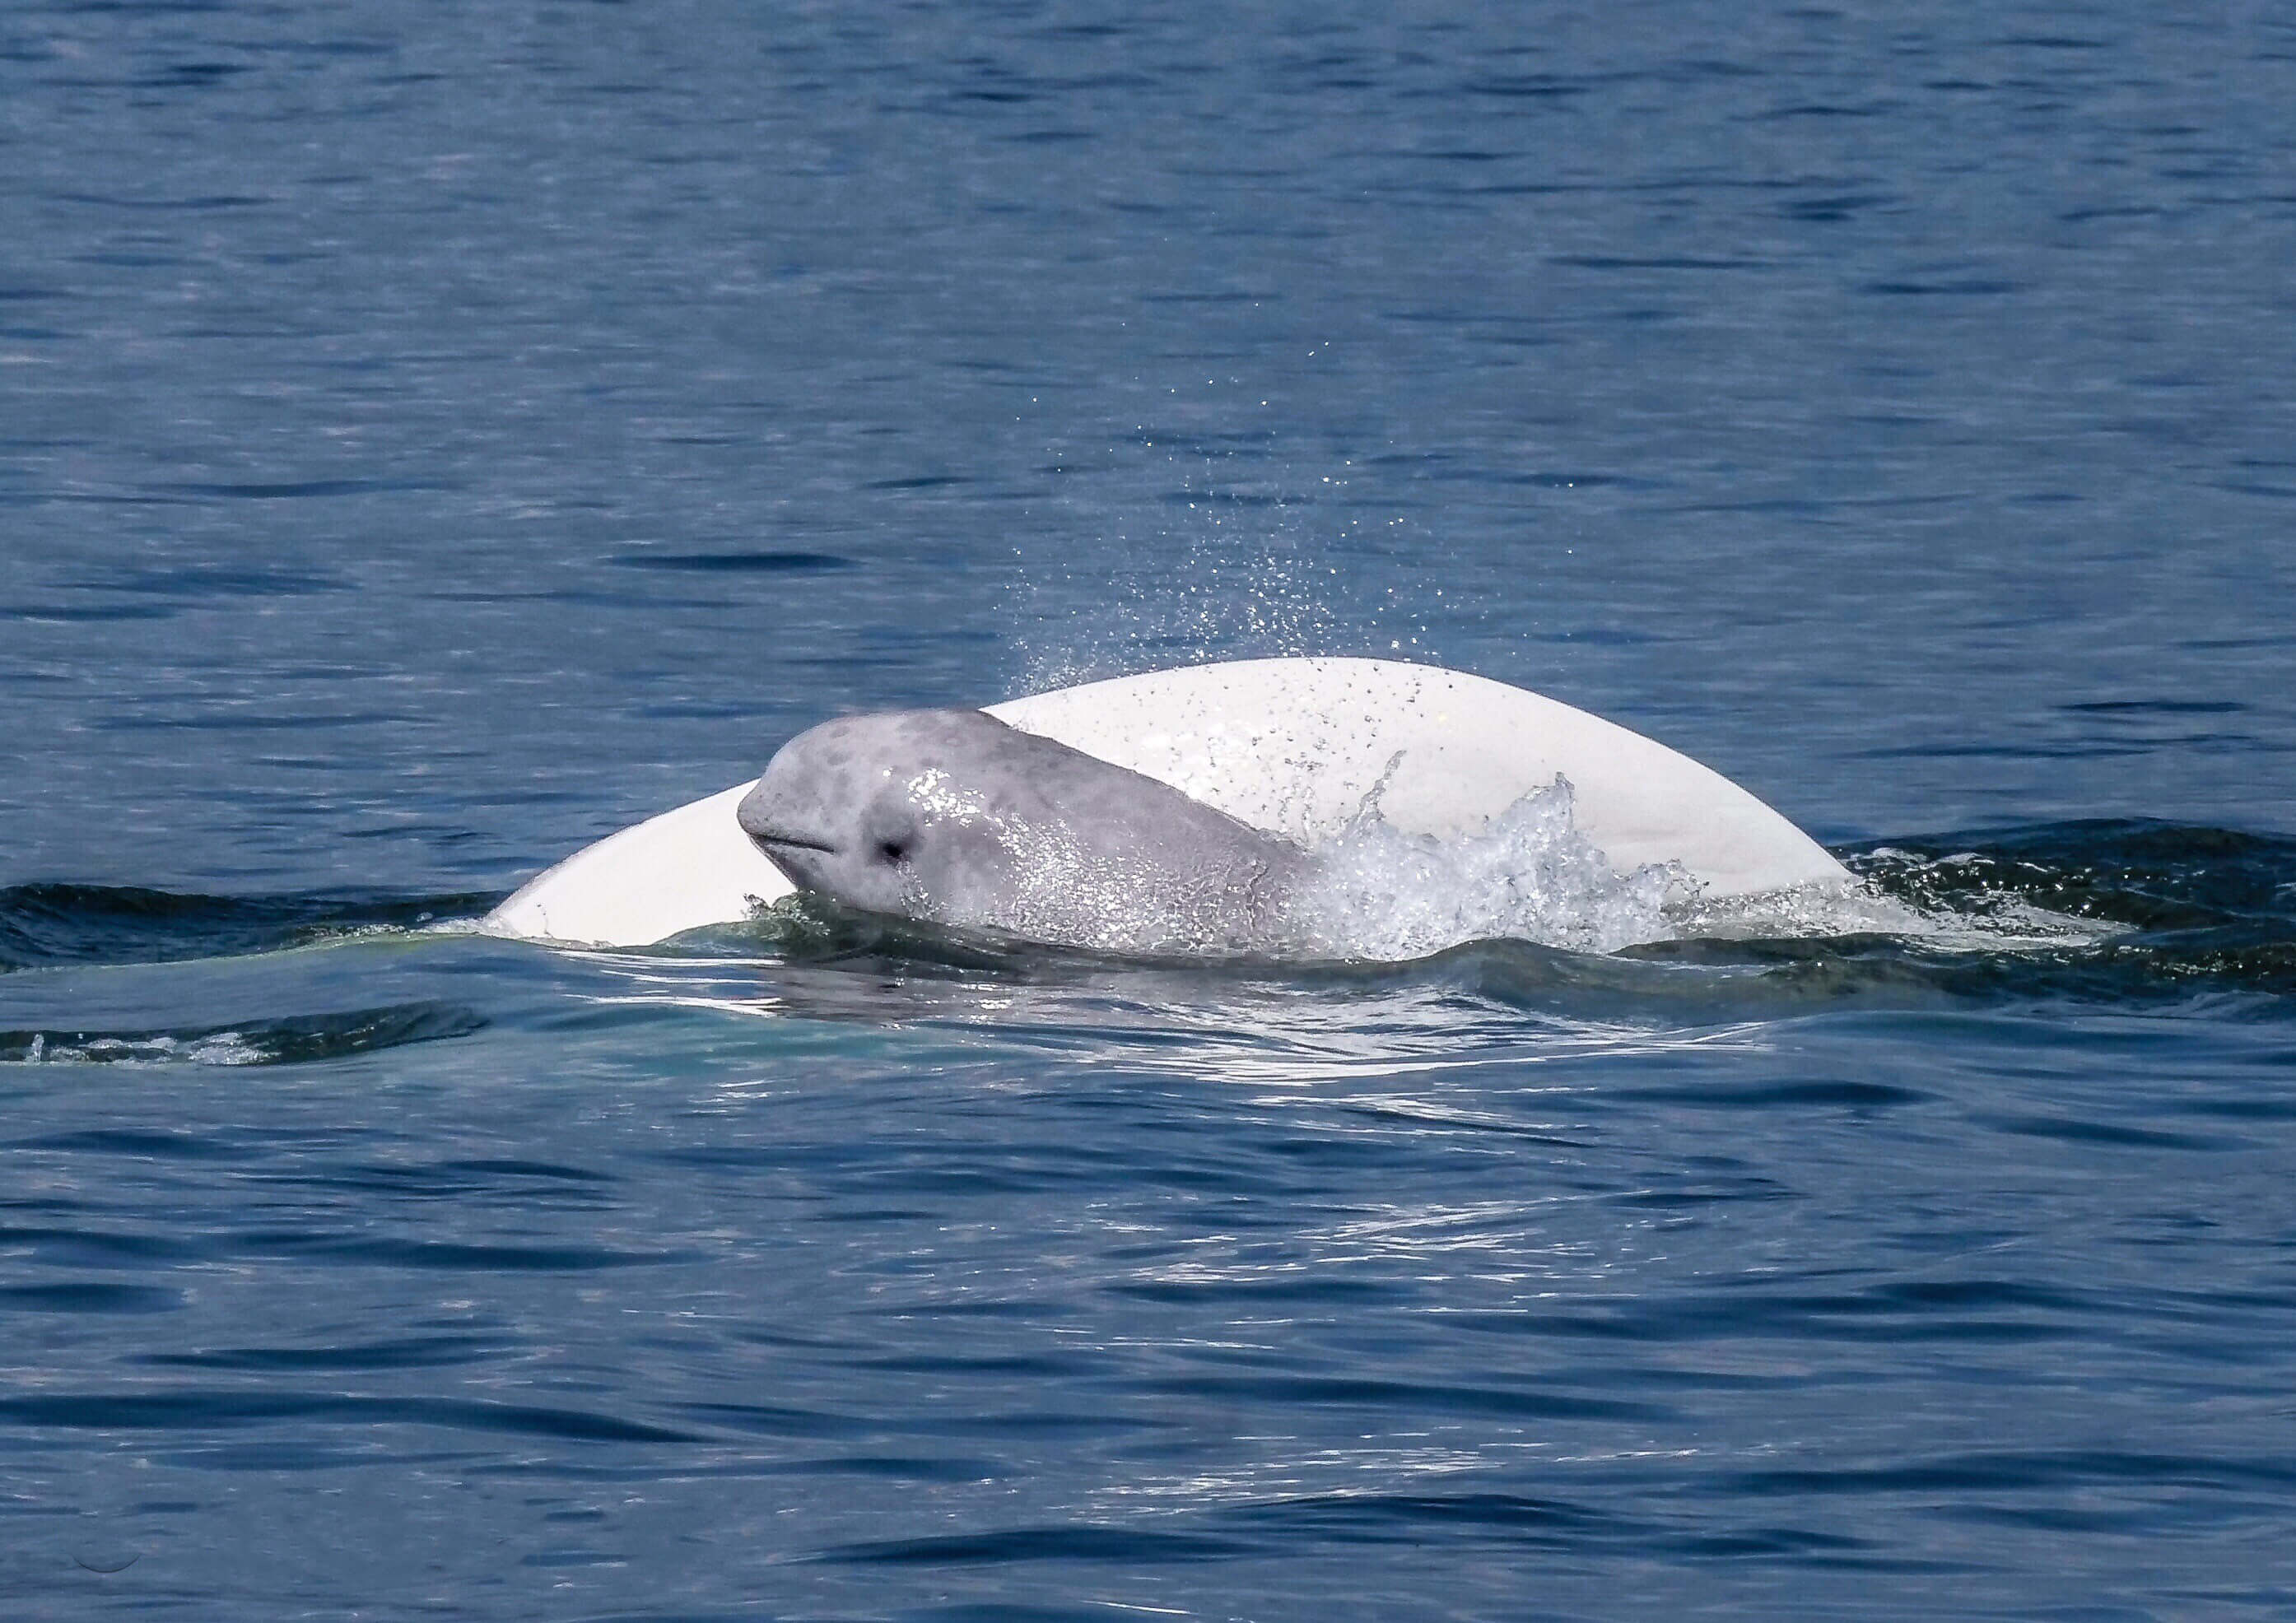 A baby beluga whale and its mother swimming in the Churchill River